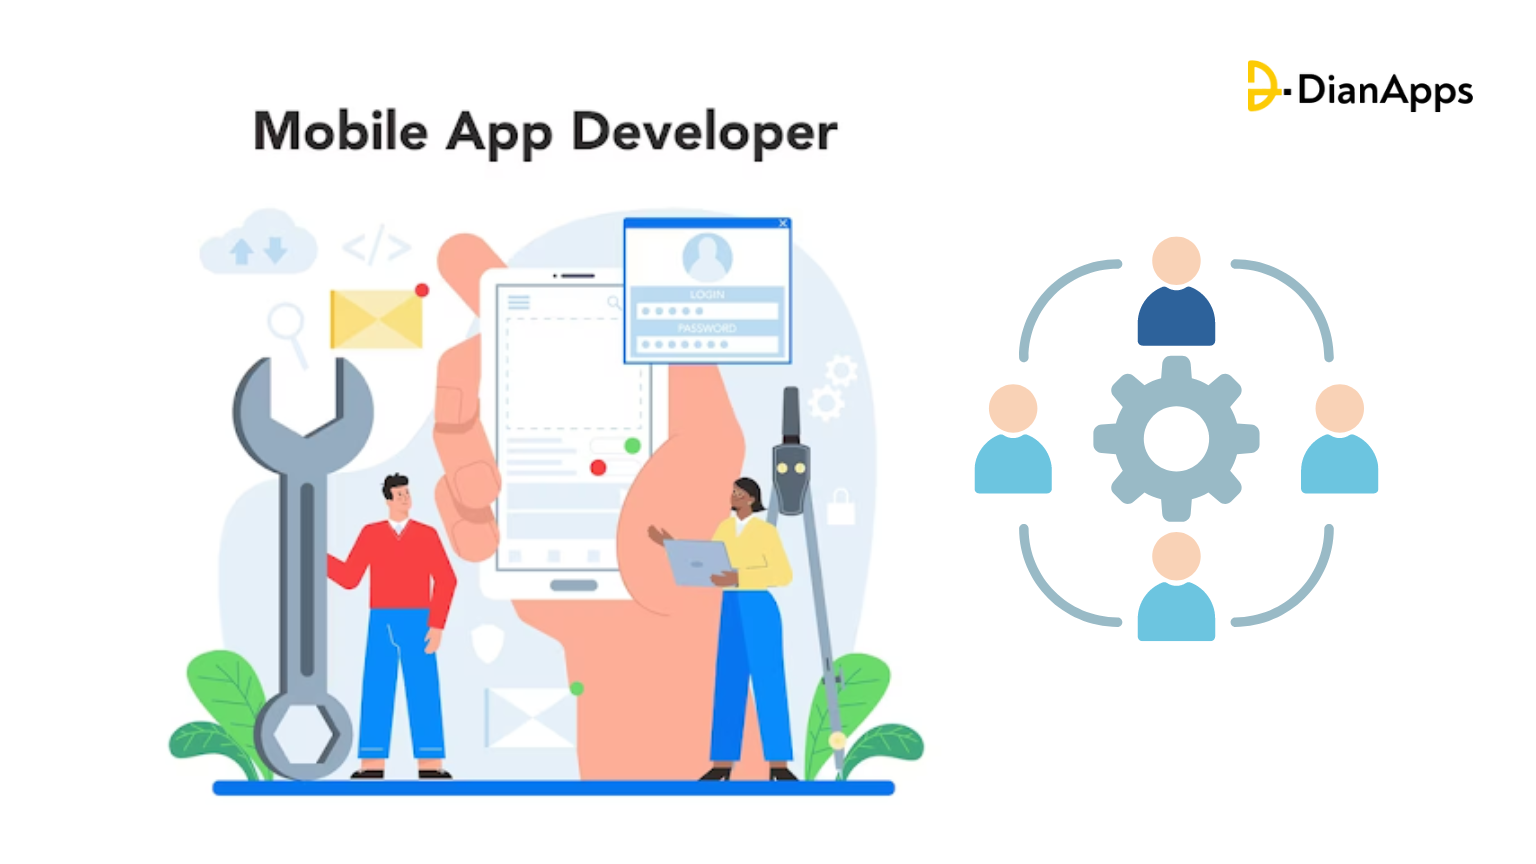 How to Attract Top Mobile App Developers for Your Company